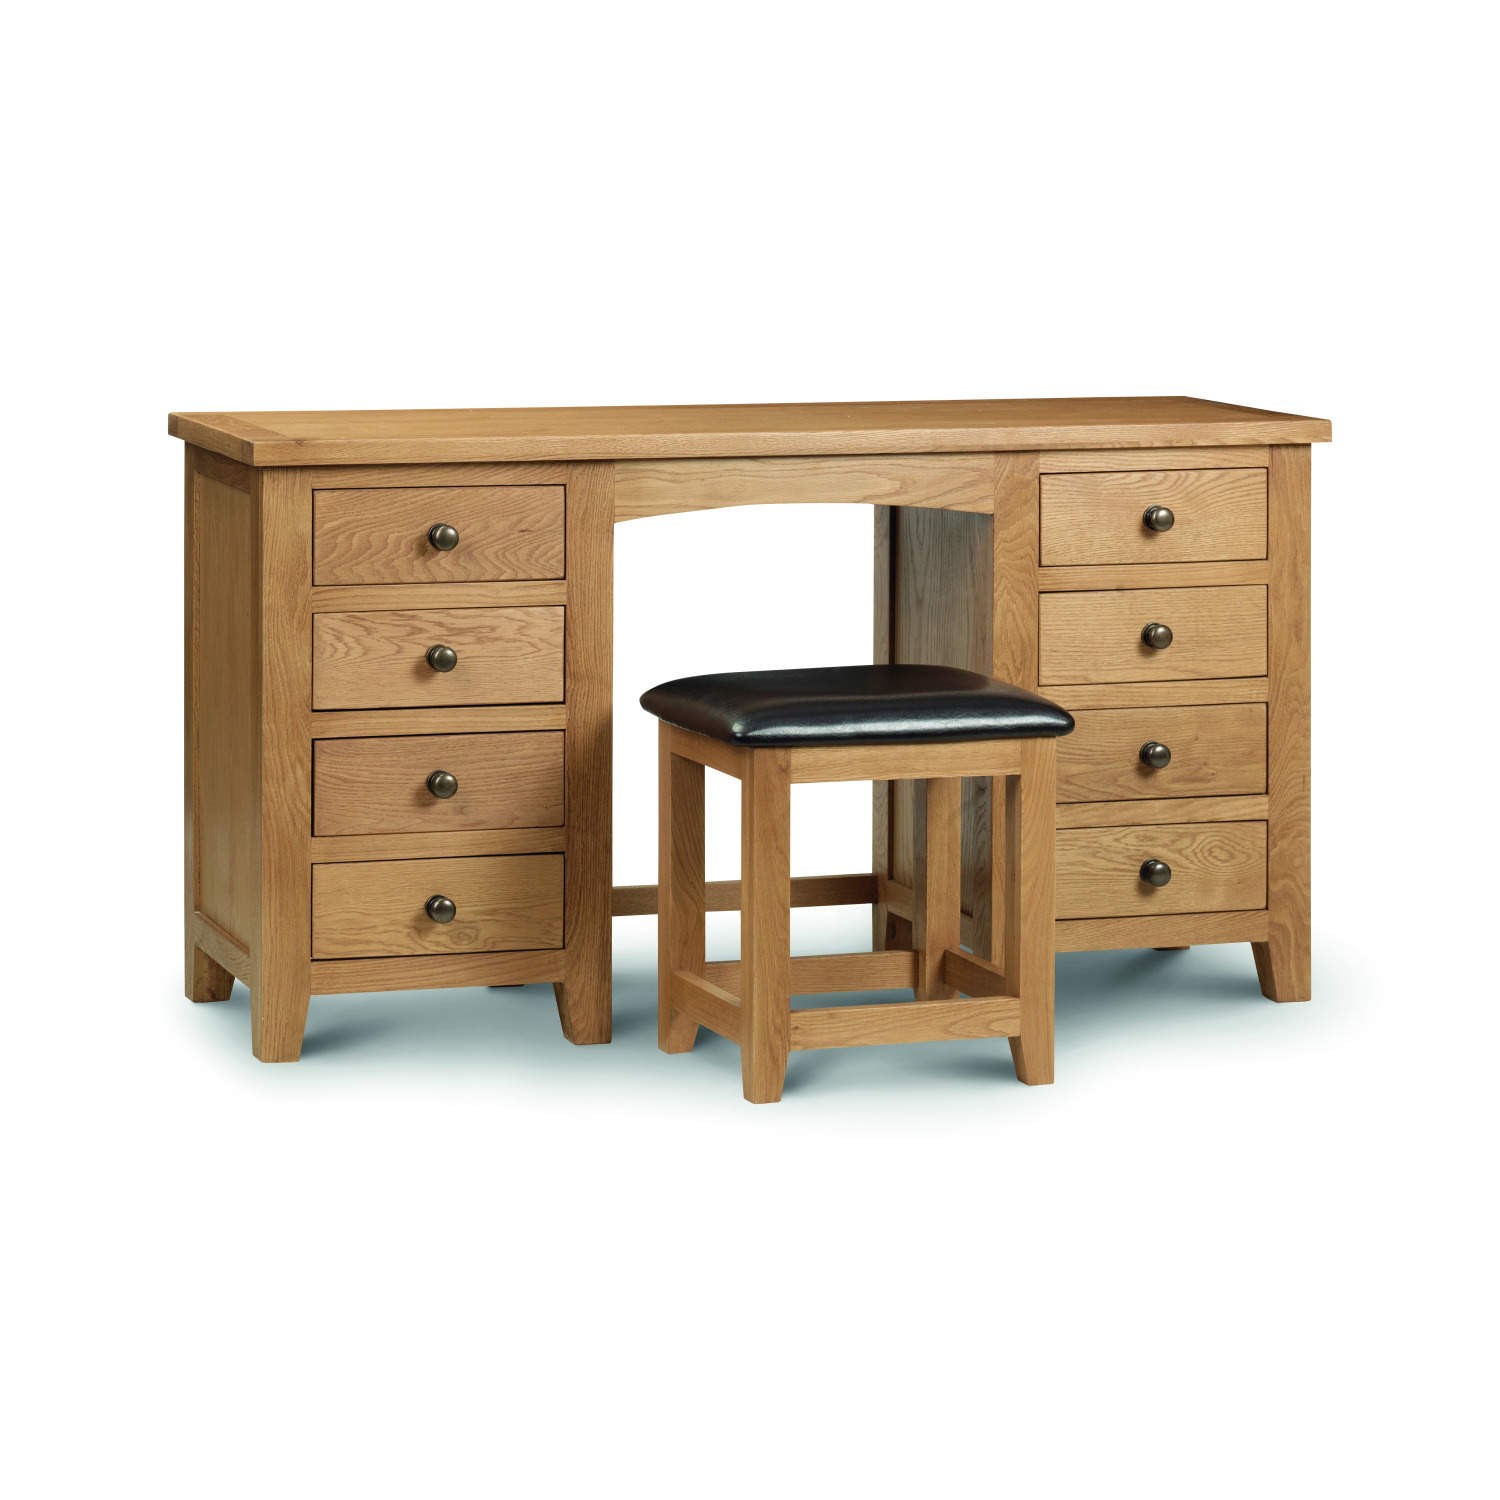 Photo of Solid oak dressing table with 8 drawers -manhattan - julian bowen